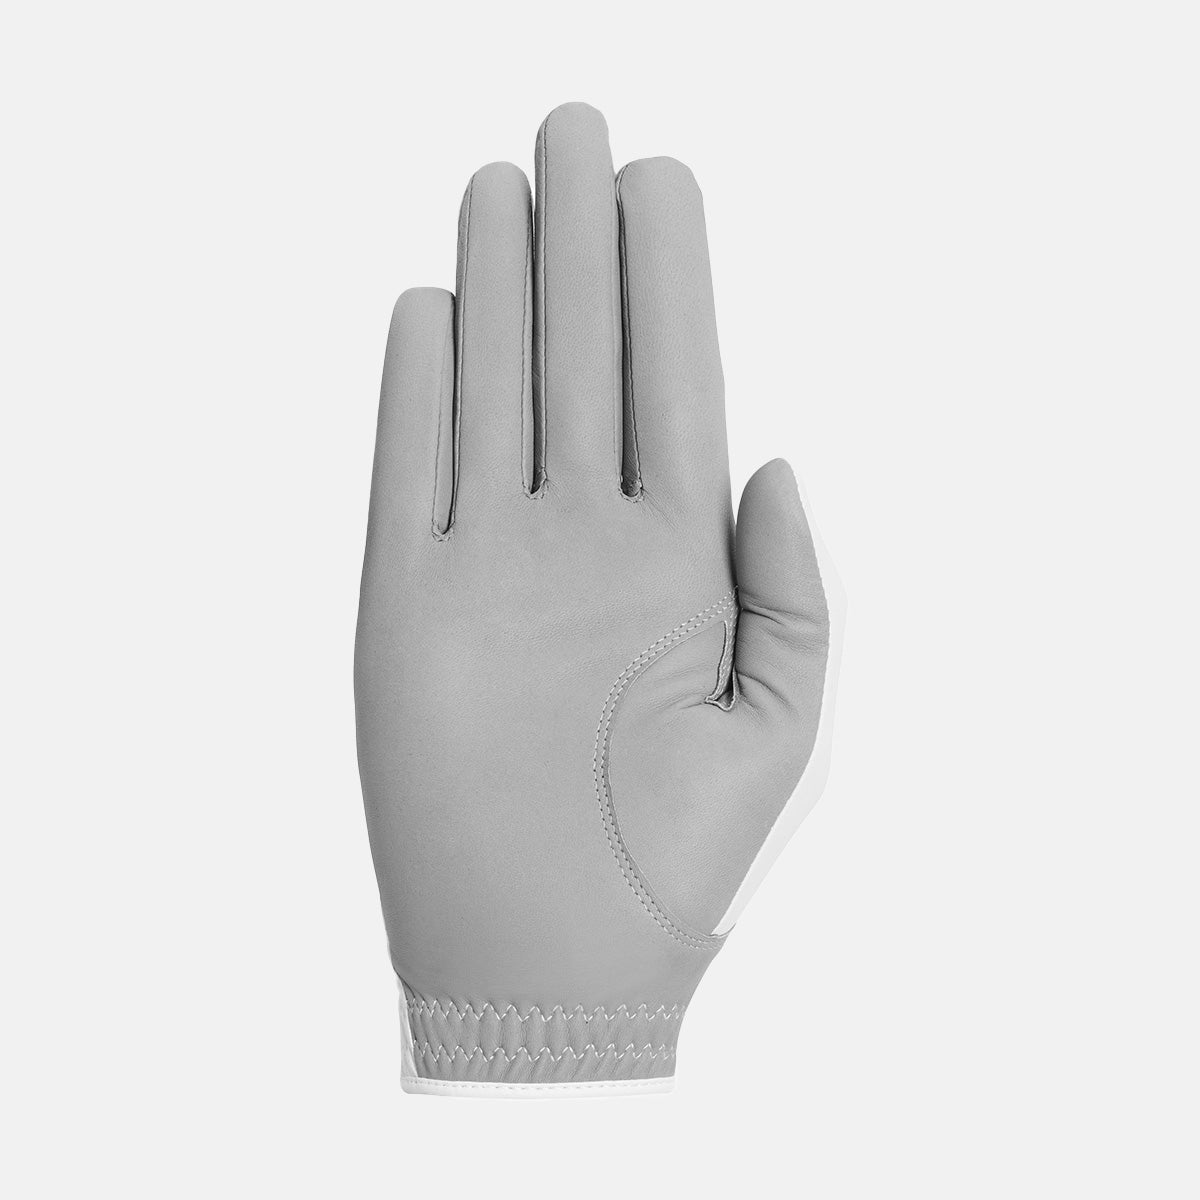 Duca del Cosma right golf glove for women's with cabretta leather and microfiber for a perfect fit